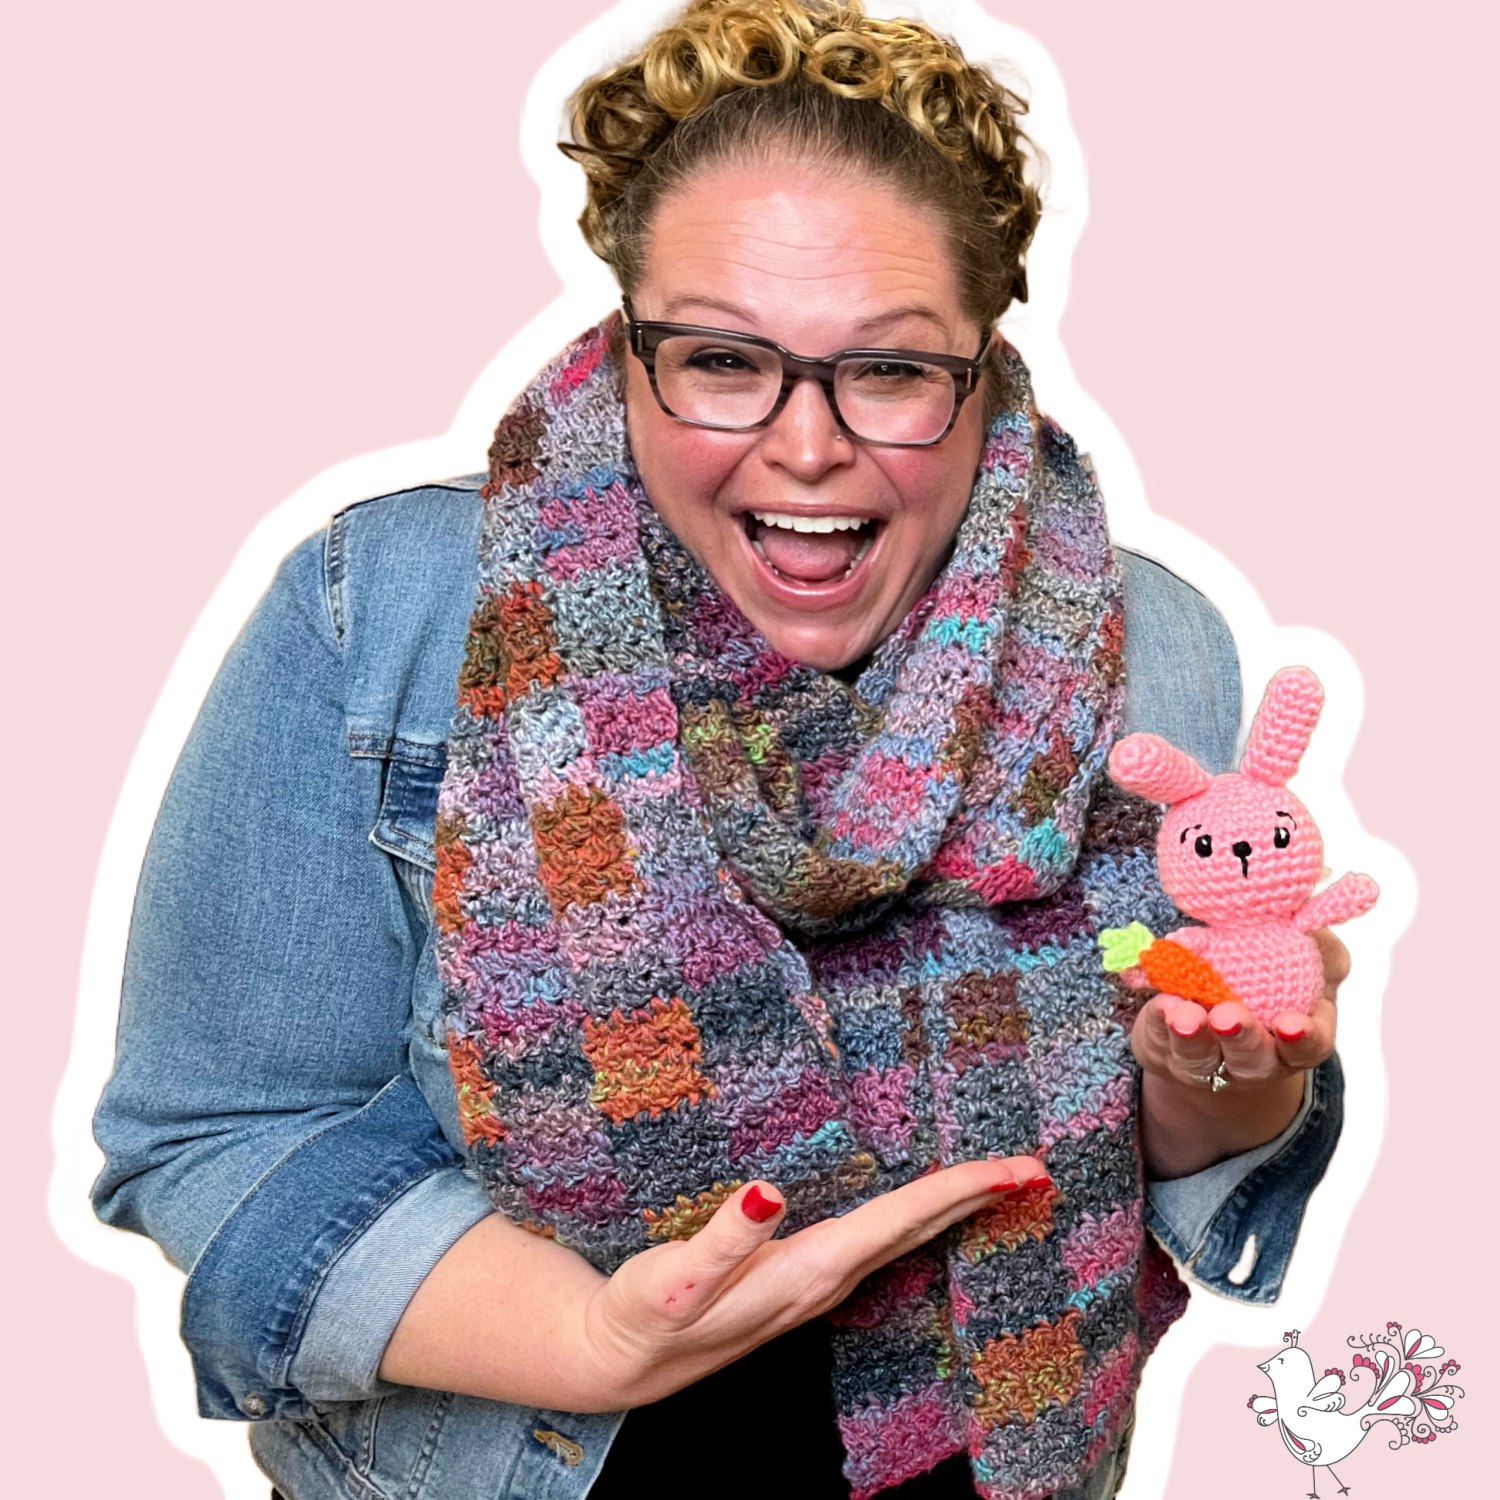 A joyous Marly Bird in a denim jacket and colorful scarf, beaming with delight as she presents a cute pink crocheted bunny rabbit with carrot. Free crochet bunny rabbit pattern on marlybird.com website